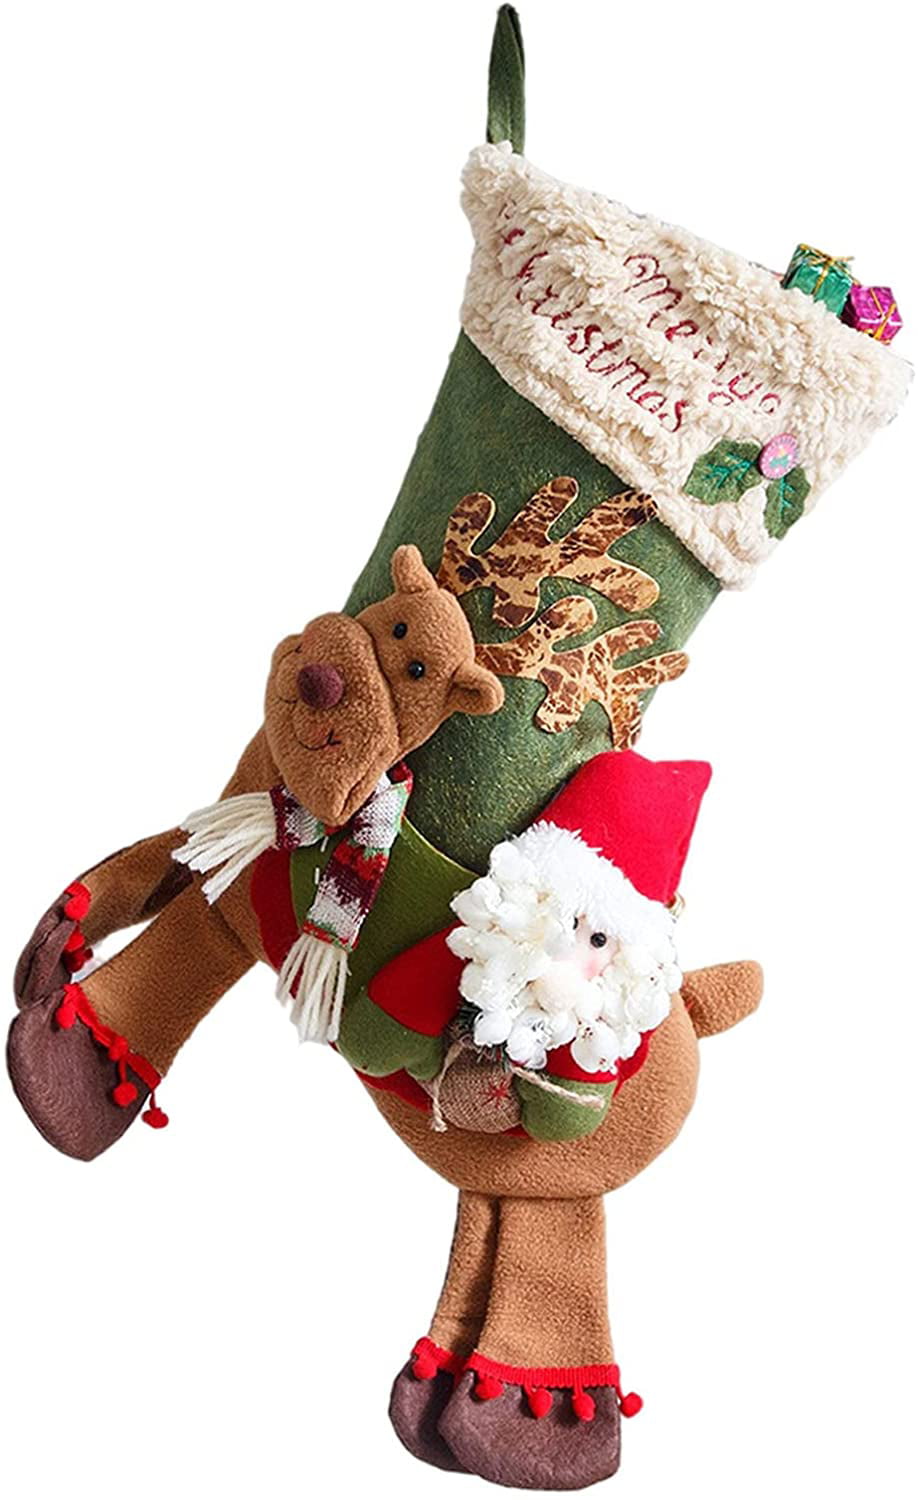 Snowman and Elk Decorations xmas 6 piece Kids & Gifts Details about   Christmas Stockings Santa 